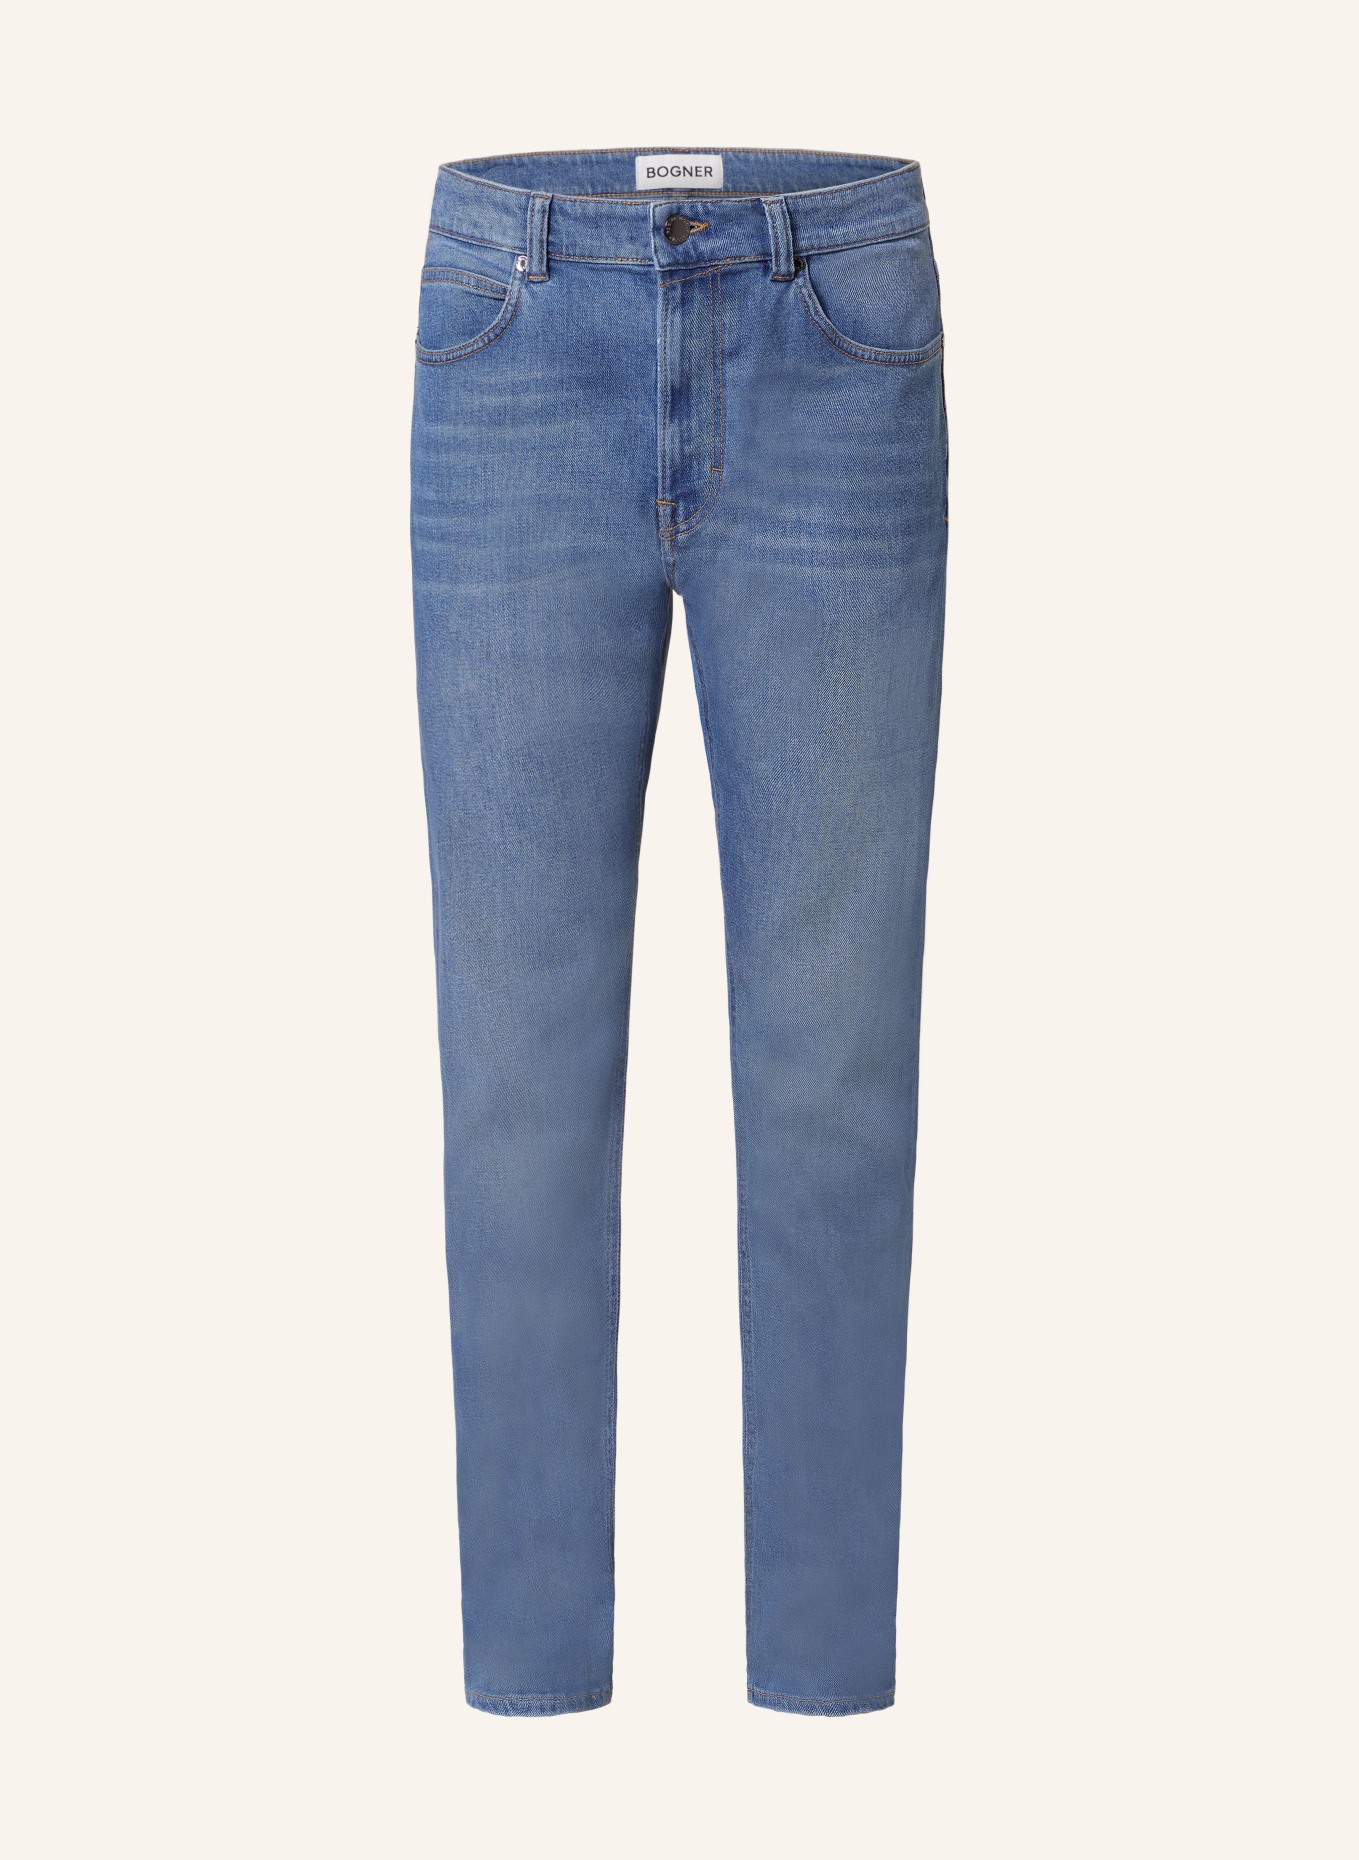 BOGNER Jeans BRIAN Tapered Fit, Farbe: 414 smokey blue (Bild 1)